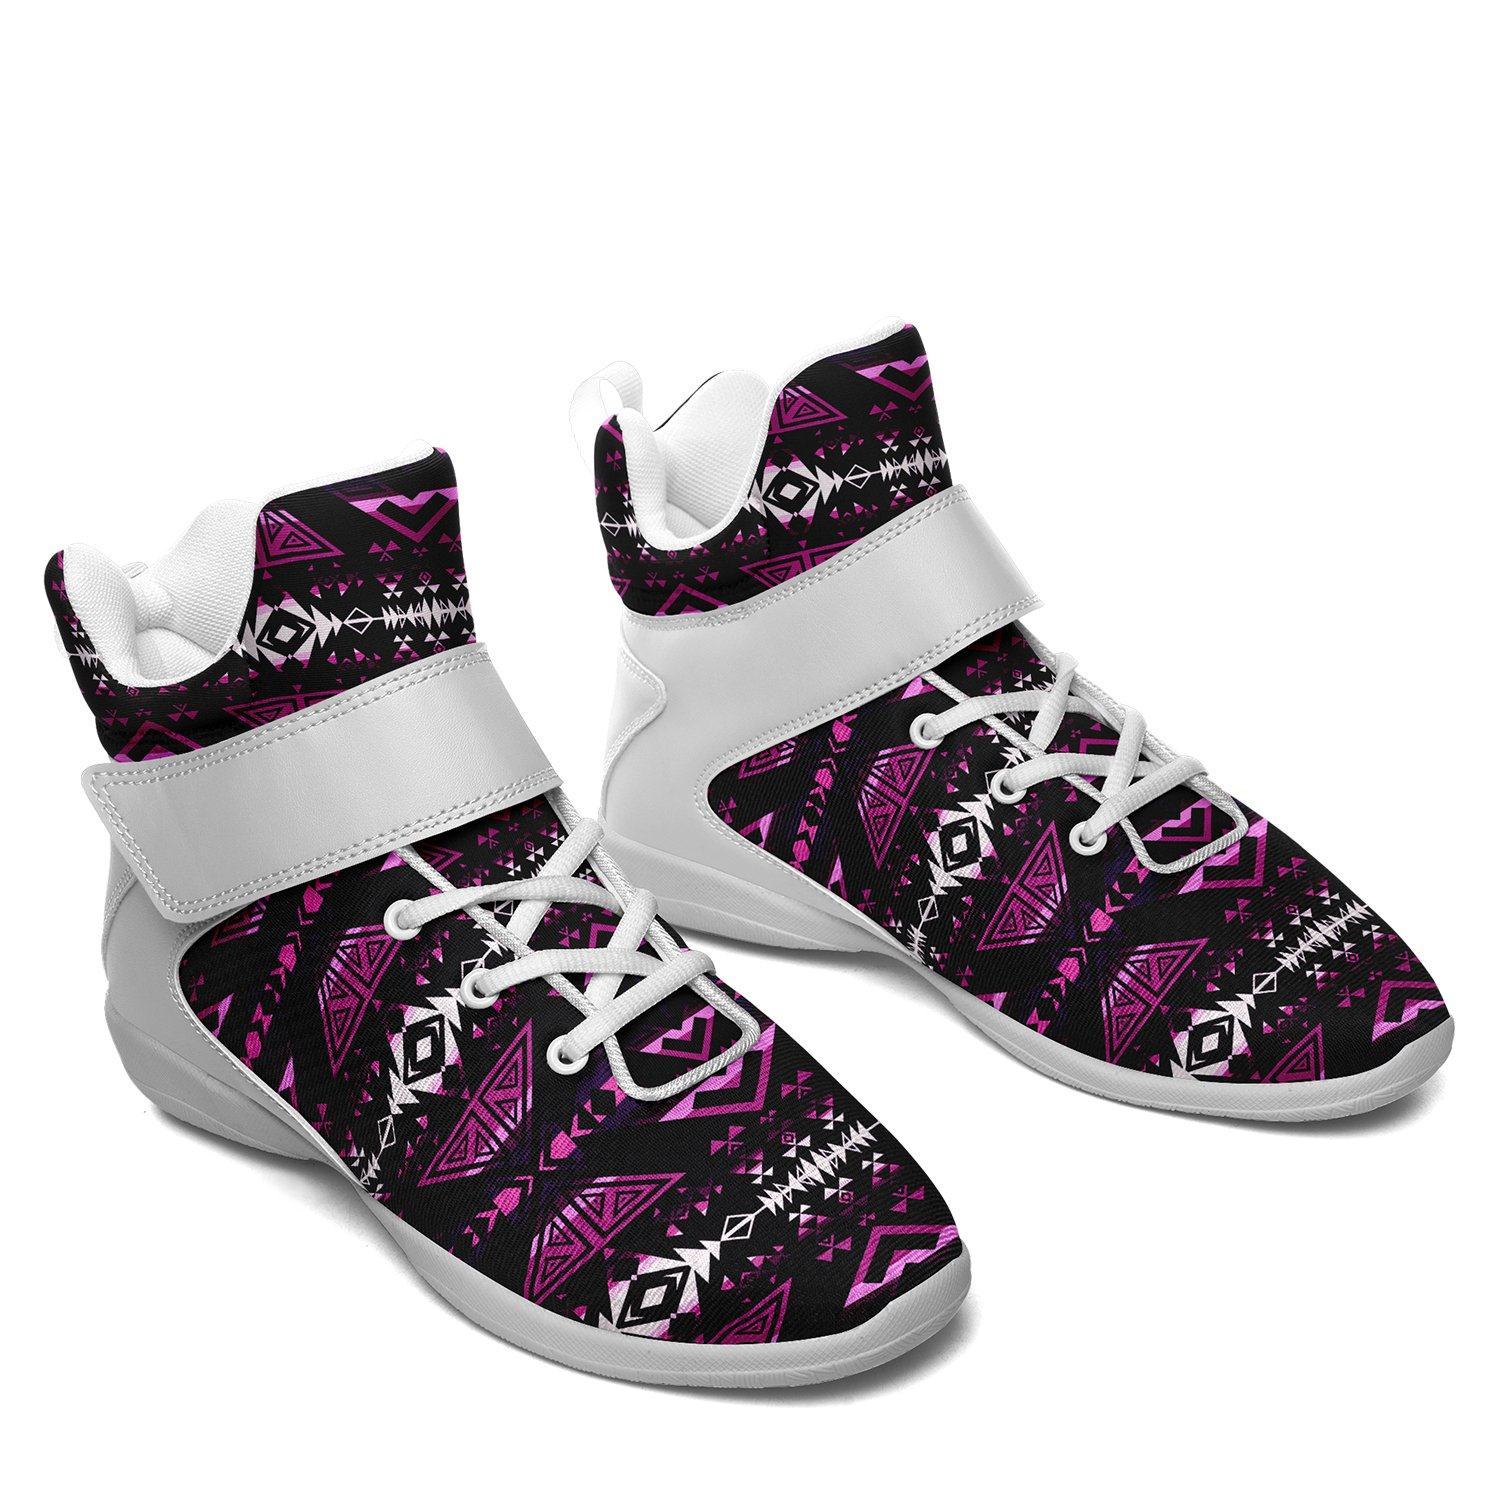 Upstream Expedition Moonlight Shadows Ipottaa Basketball / Sport High Top Shoes - White Sole 49 Dzine 